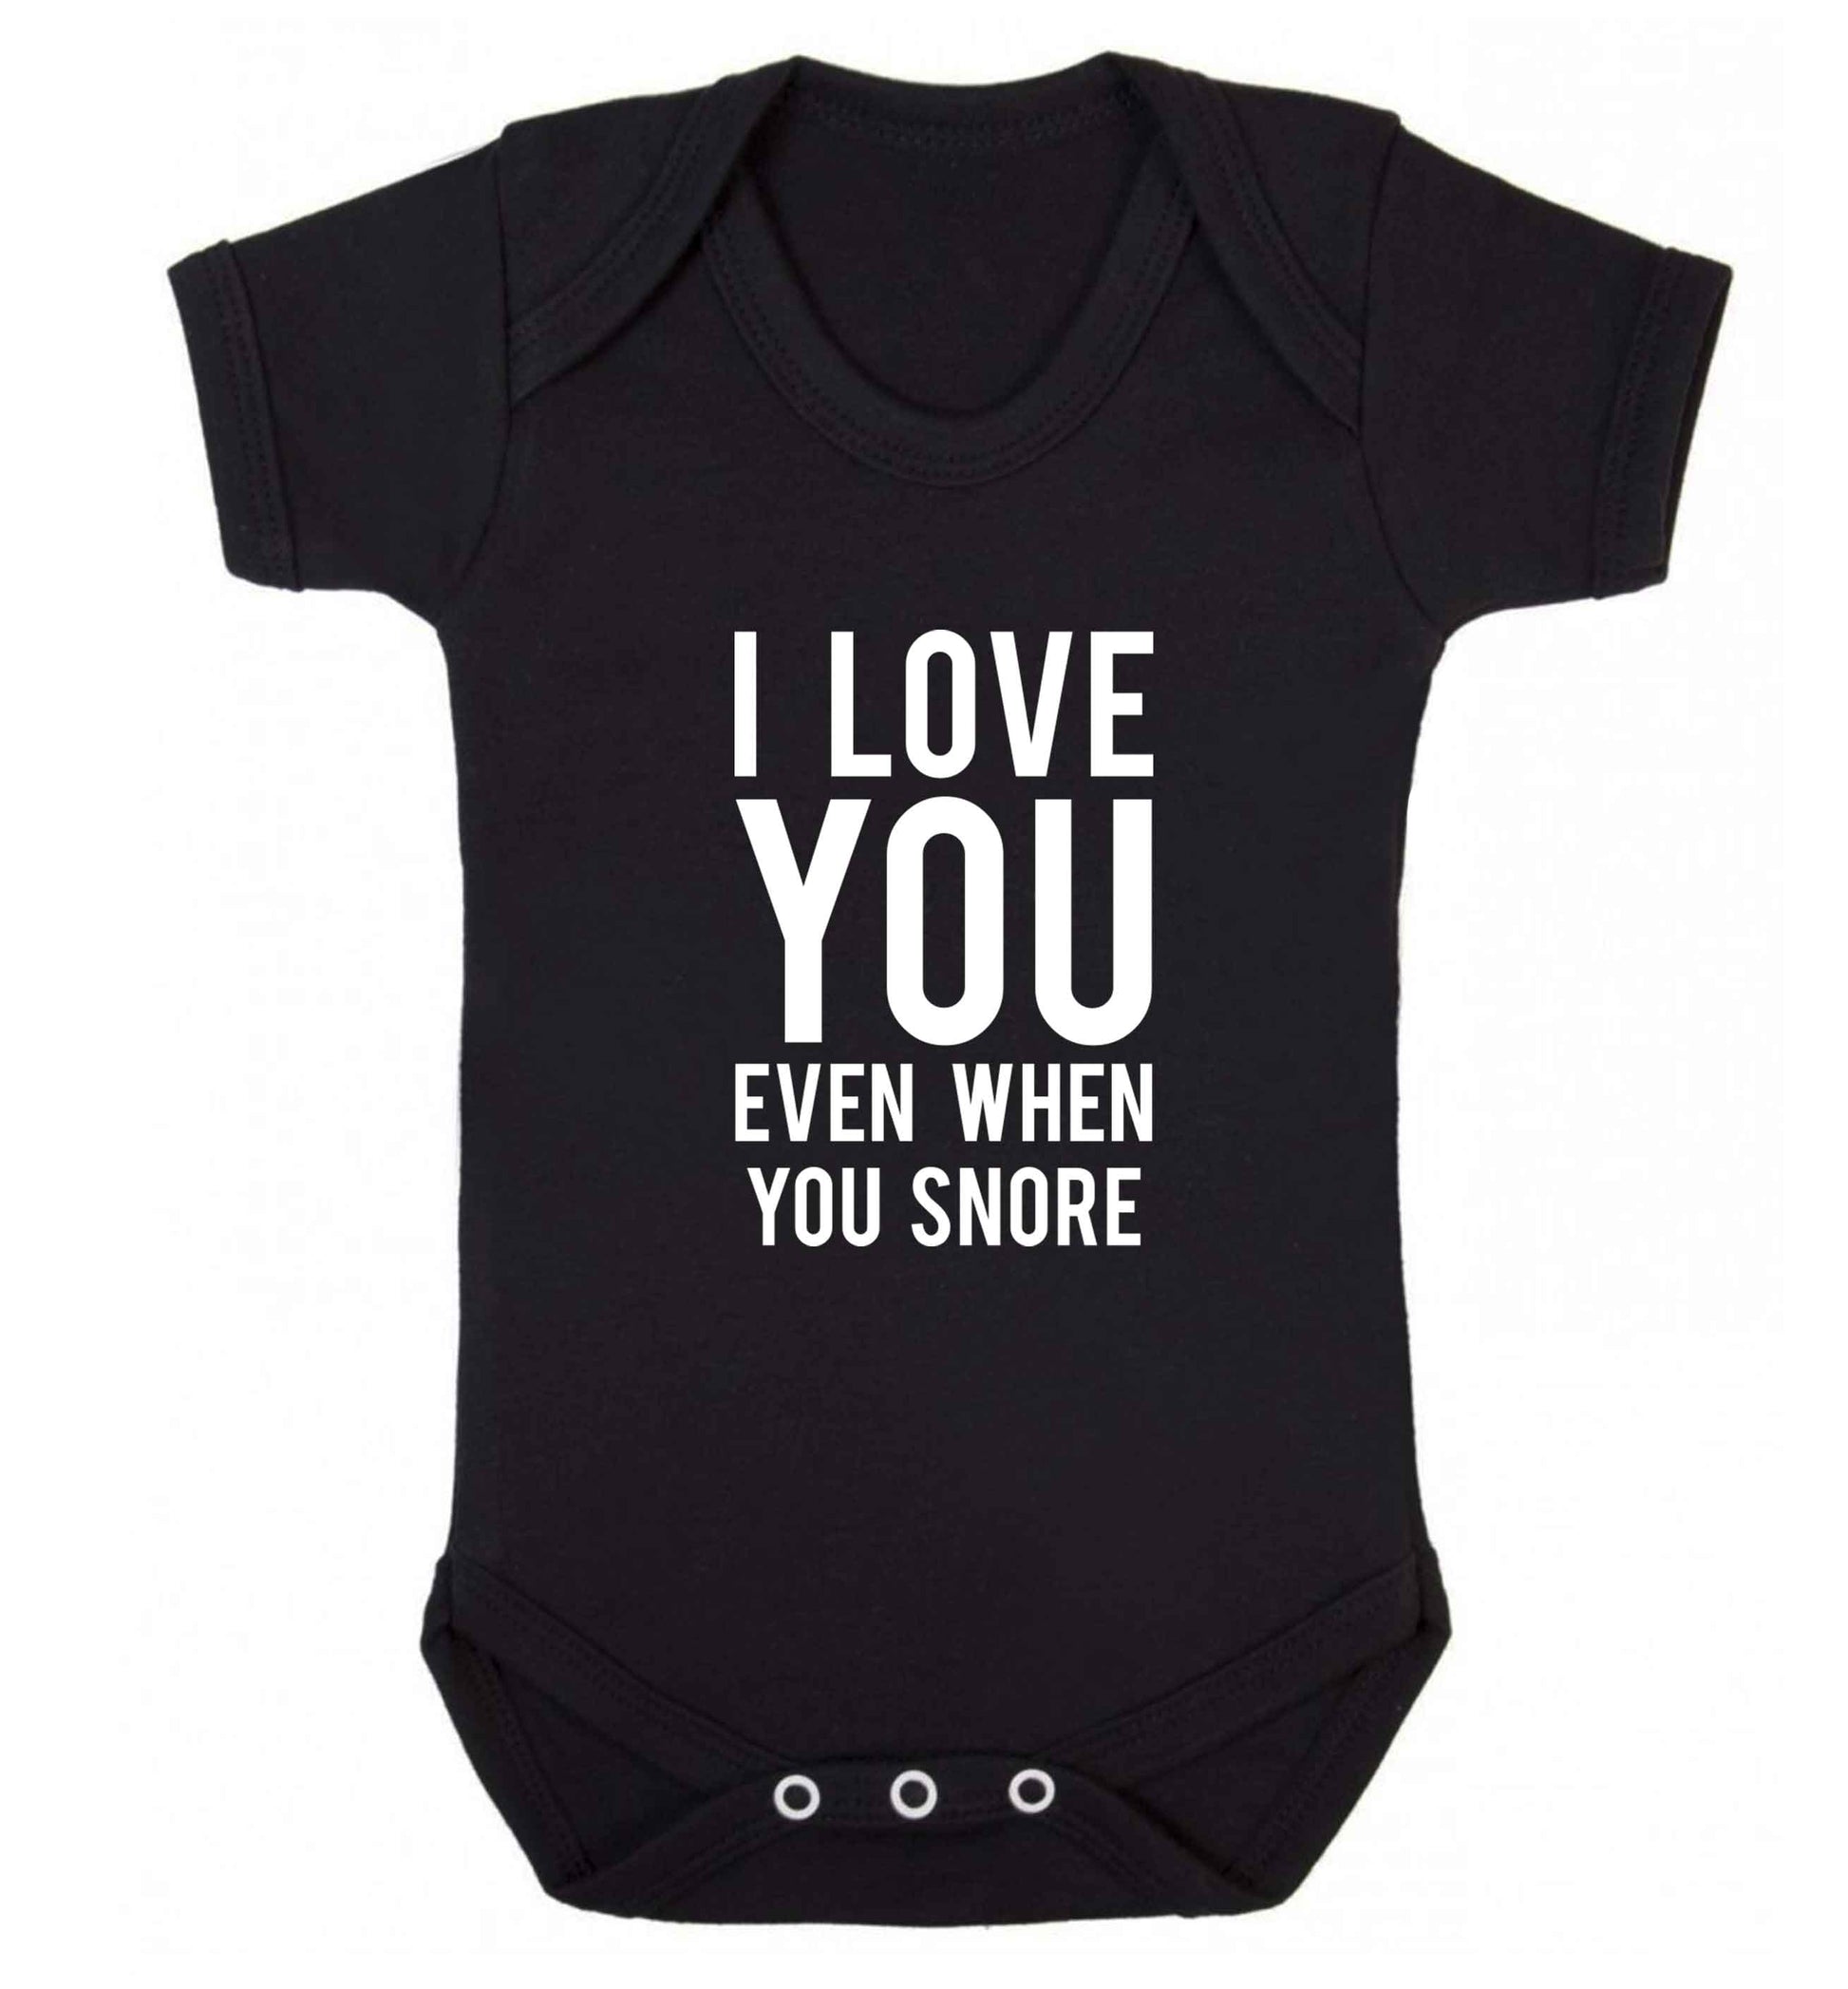 I love you even when you snore baby vest black 18-24 months